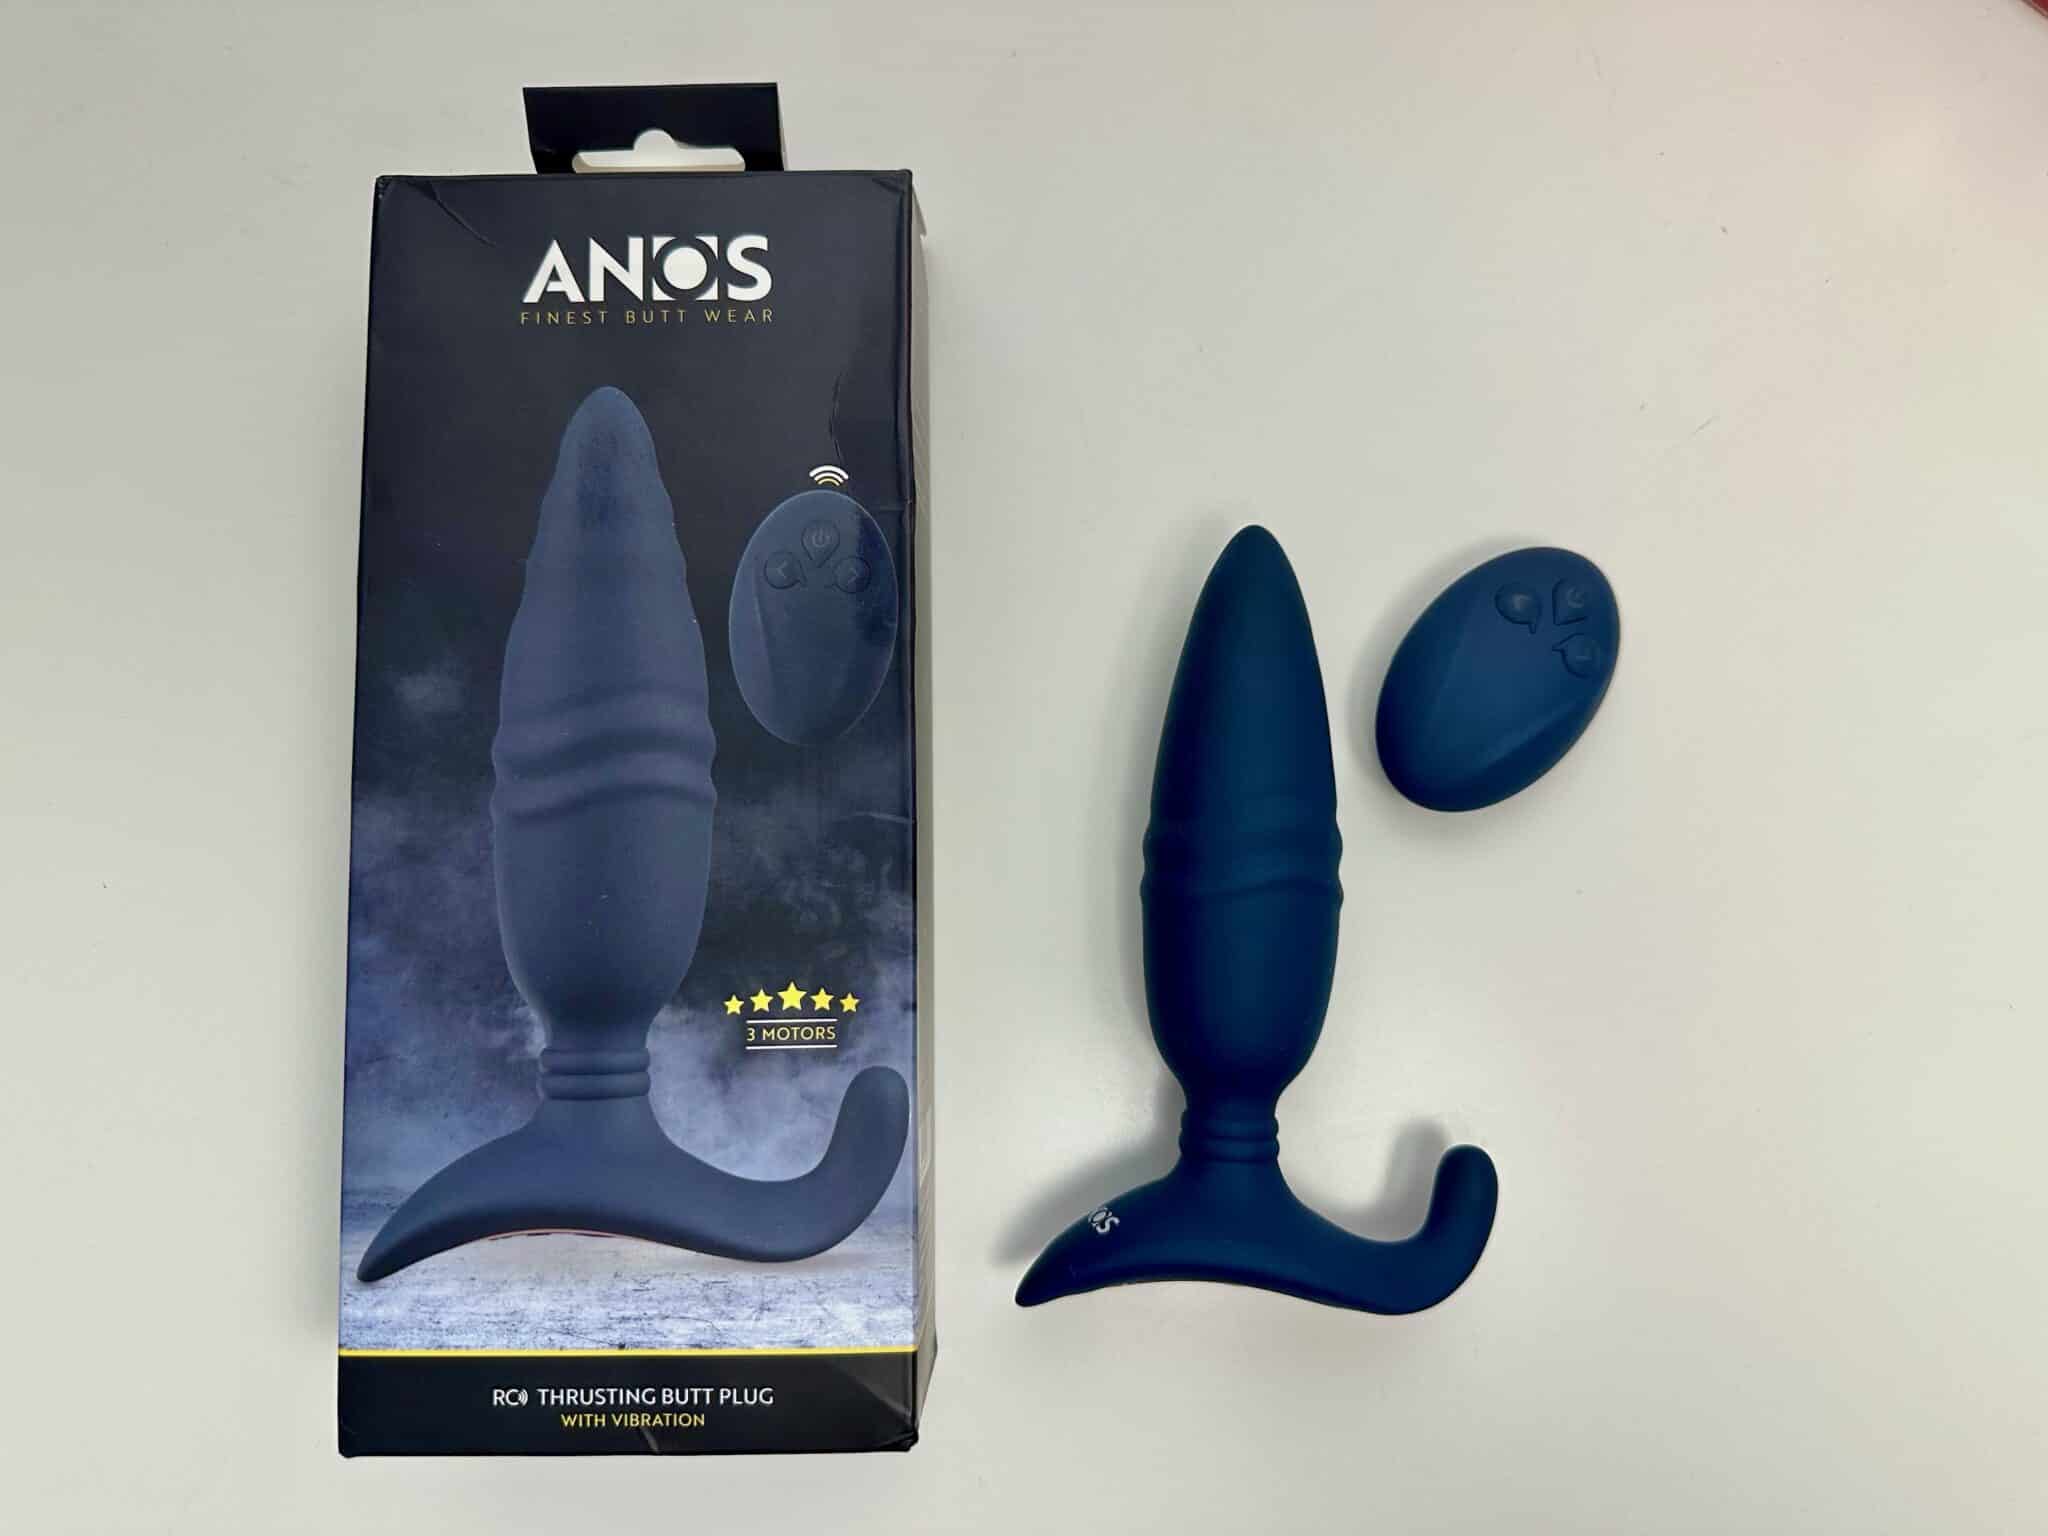 Anos Thrusting Butt Plug The Unboxing Experience: A Review